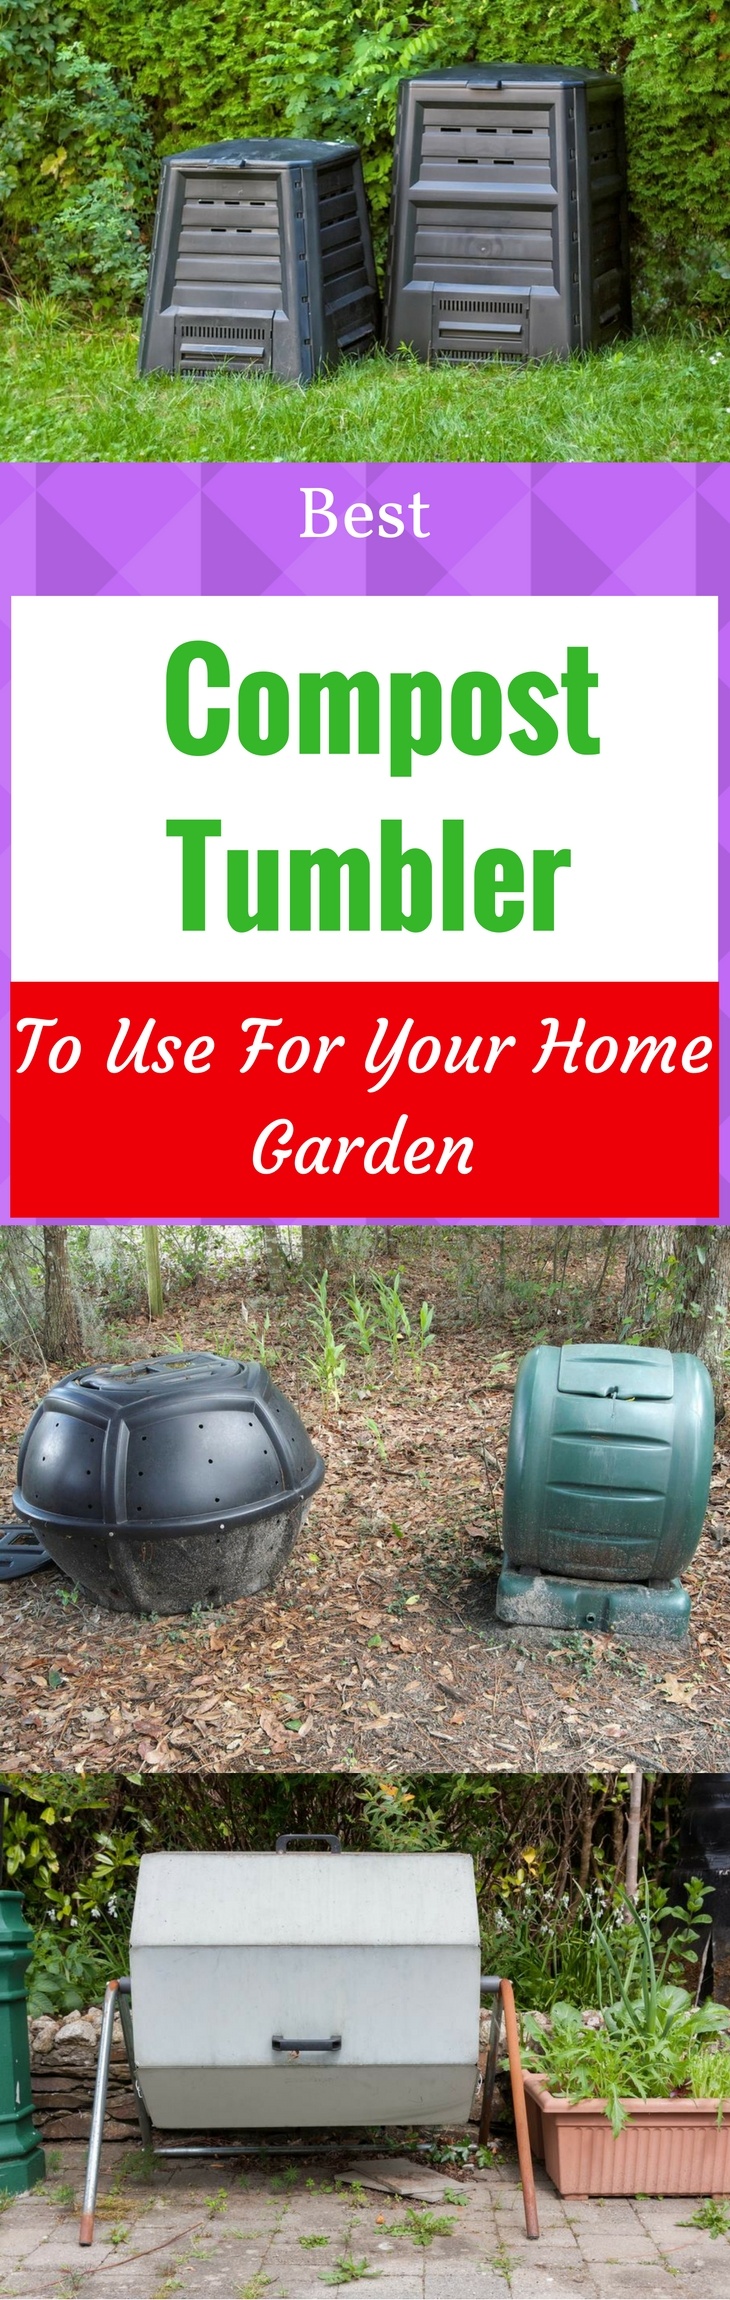 Best Compost Tumbler To Use For Your Home Garden - Pin it